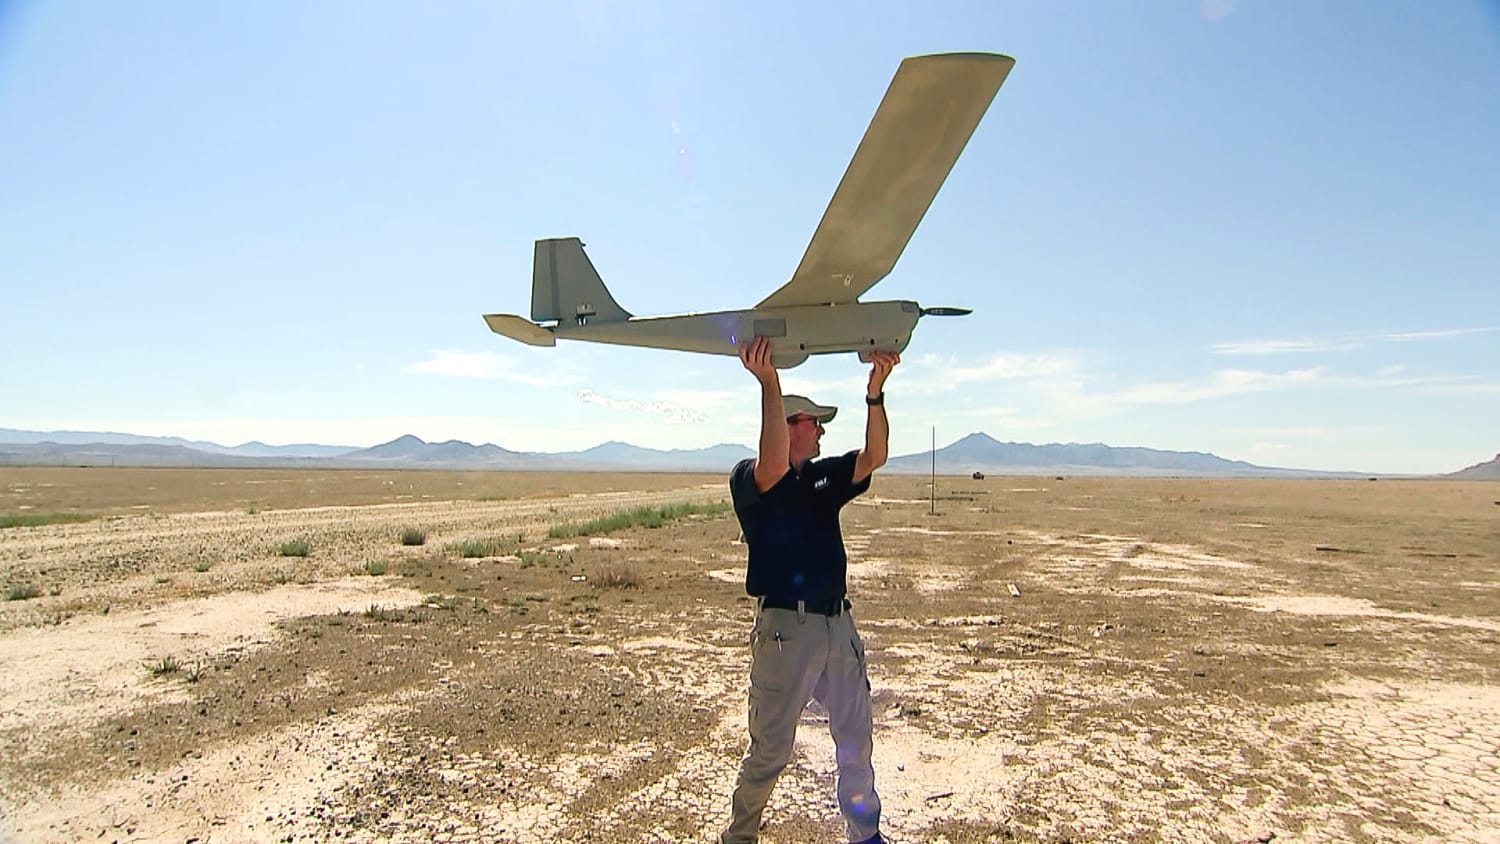 Kamikaze drones: A new weapon brings power and peril the military